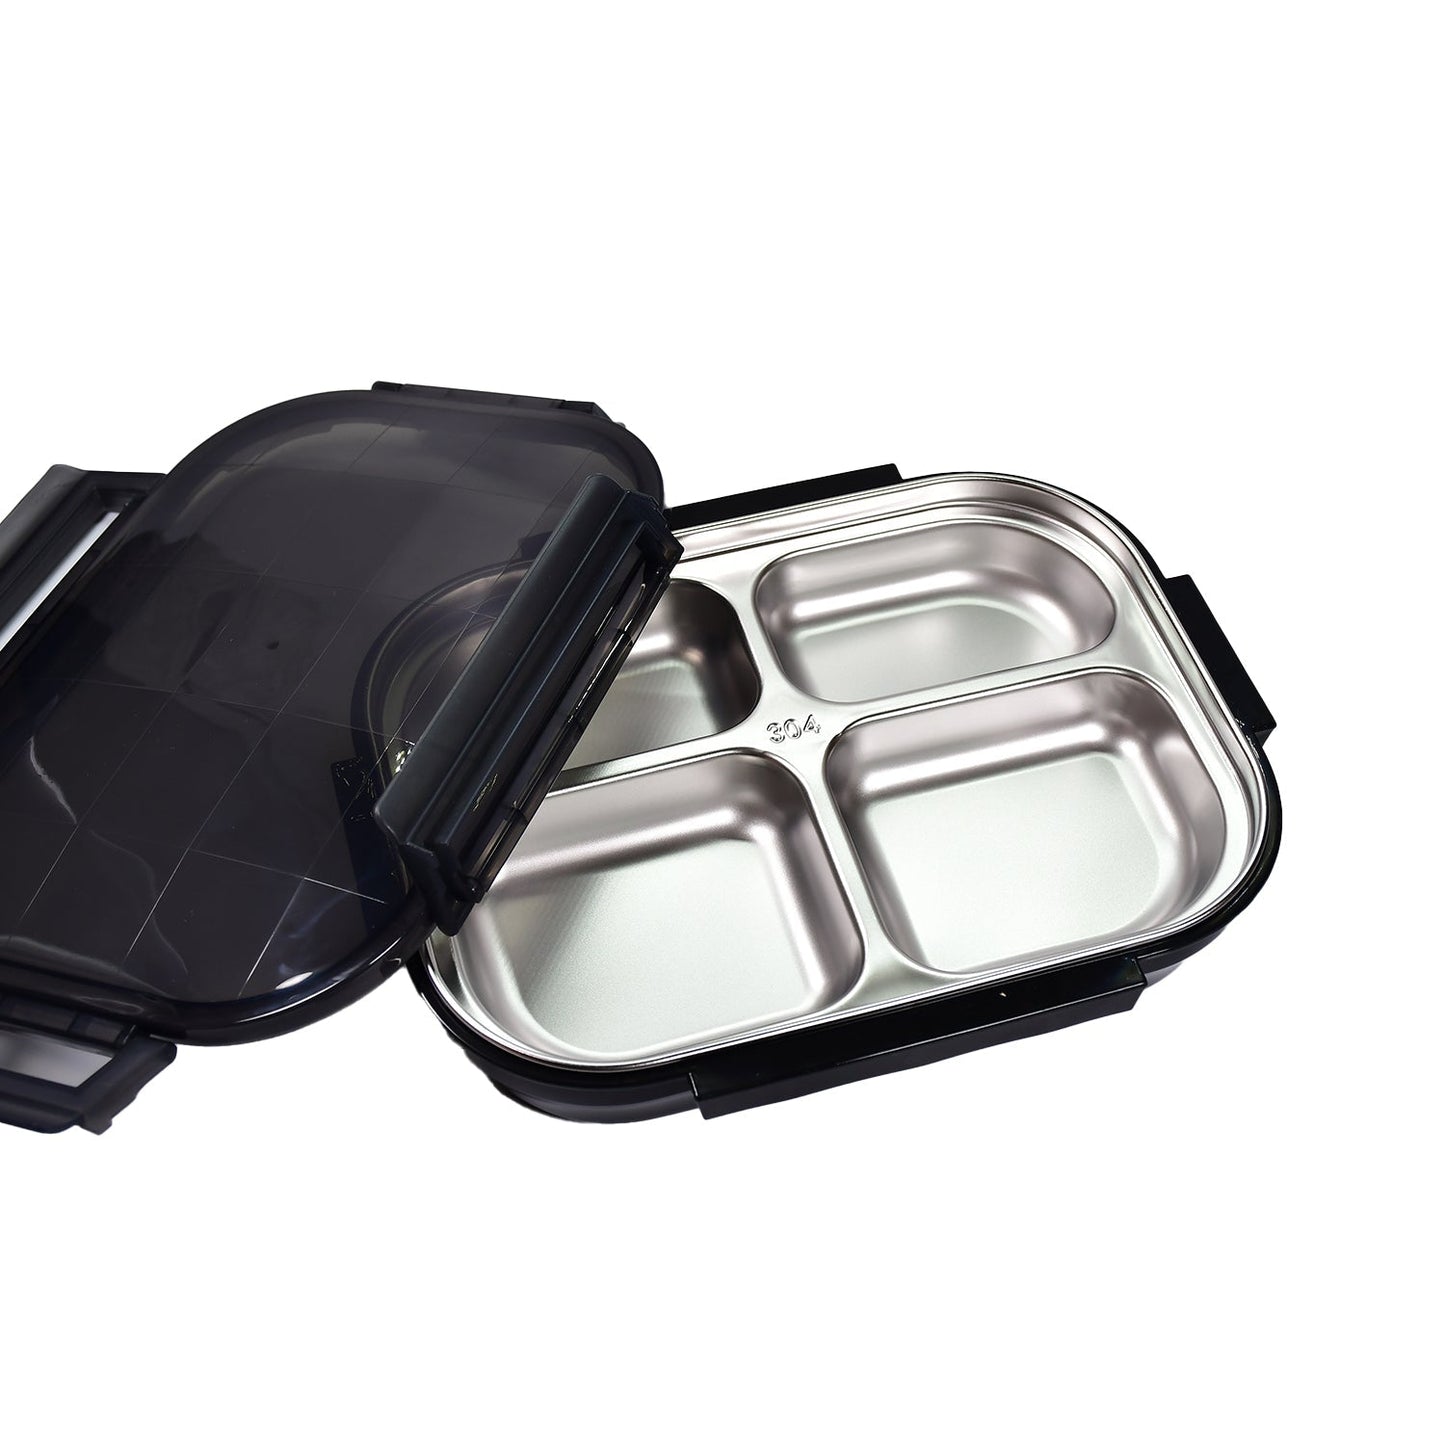 2979 Black Transparent 4 Compartment Lunch Box for Kids and adults, Stainless Steel Lunch Box with 4 Compartments. 